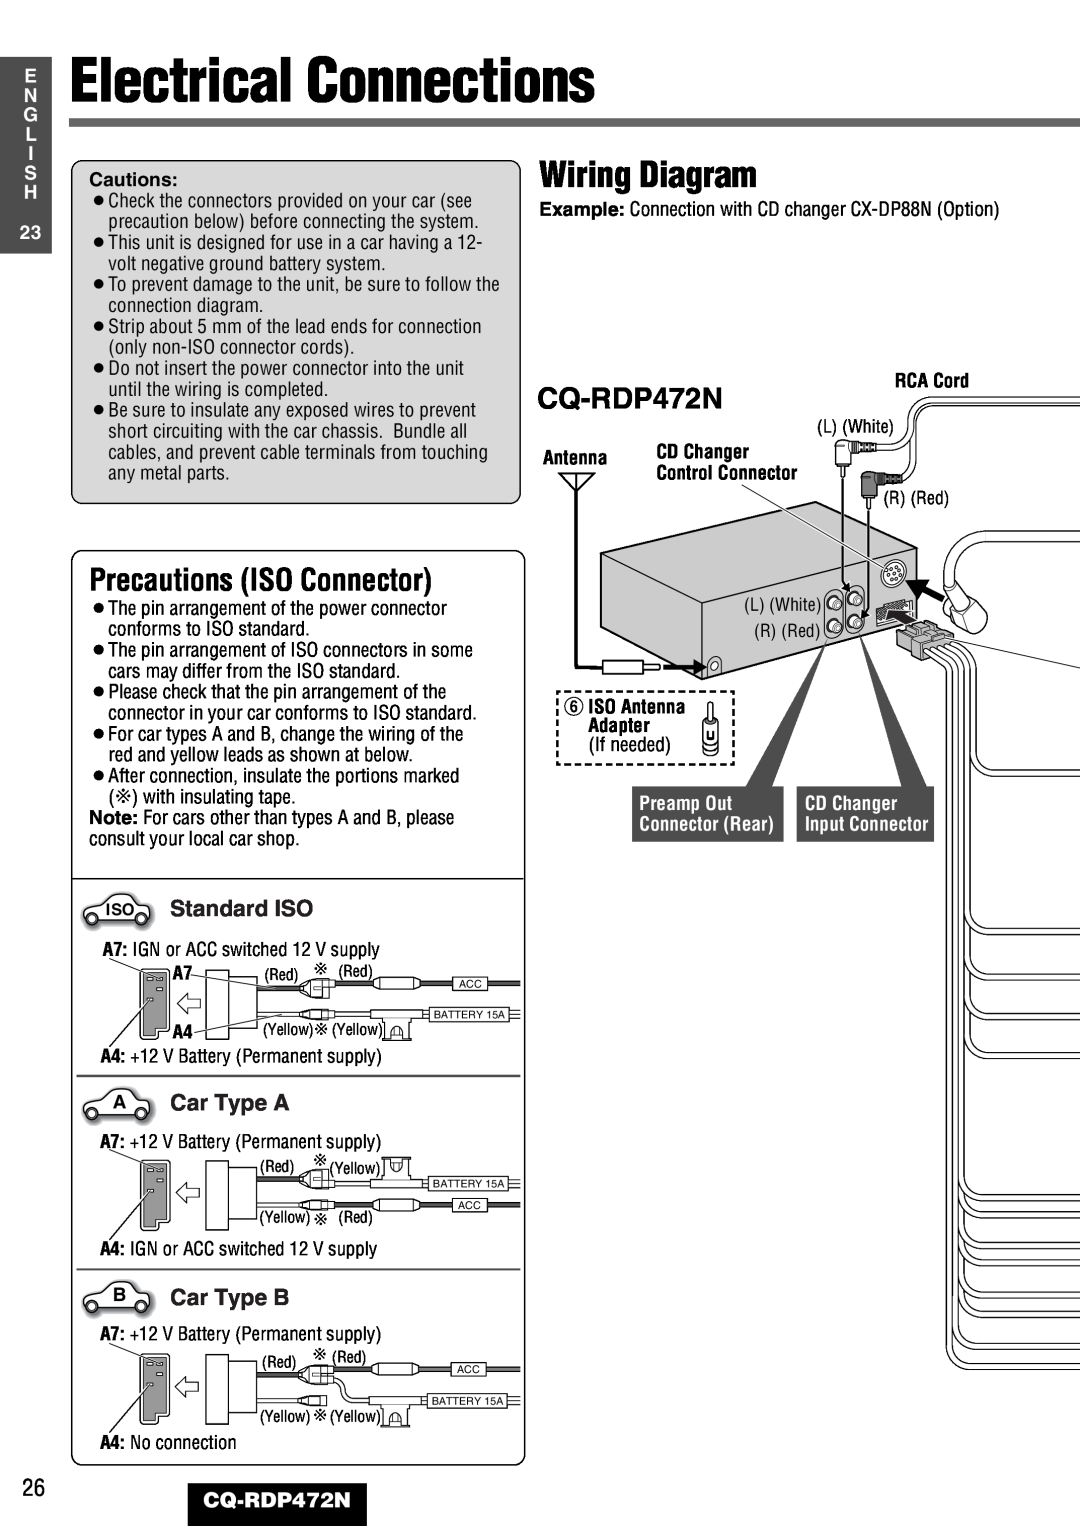 Panasonic CQ-RDP472N manual Electrical Connections, Precautions ISO Connector, Wiring Diagram, Standard ISO, ACar Type A 